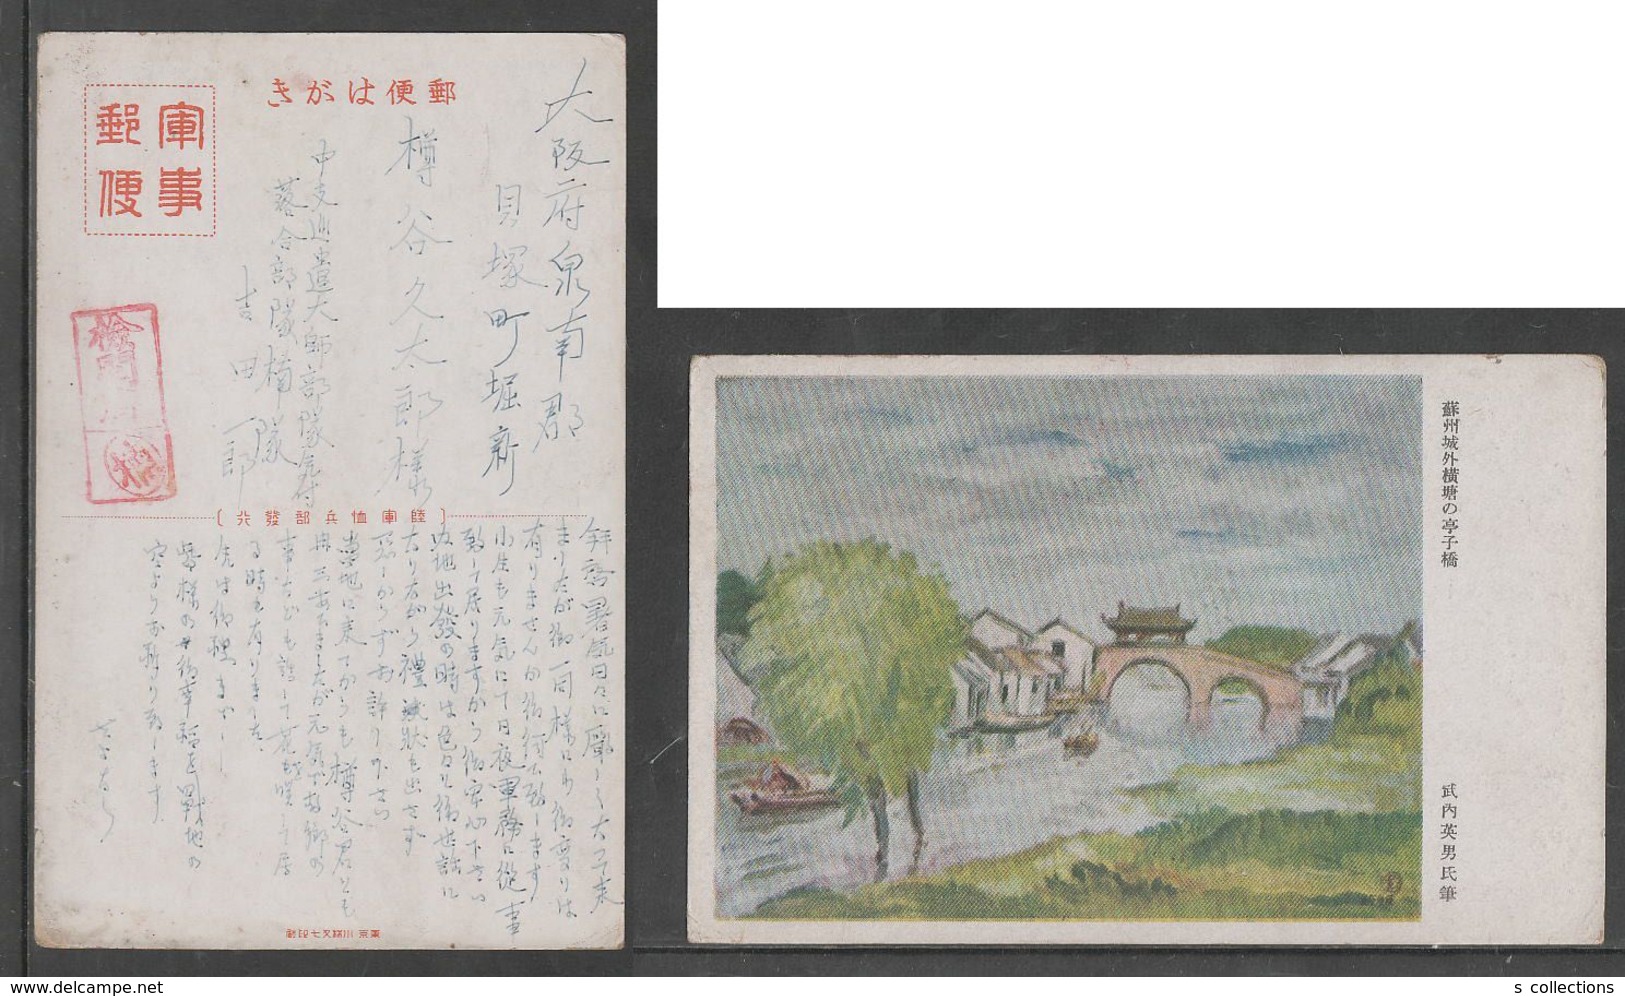 JAPAN WWII Military Suzhou Picture Postcard CENTRAL CHINA WW2 MANCHURIA CHINE MANDCHOUKOUO JAPON GIAPPONE - 1943-45 Shanghai & Nanjing